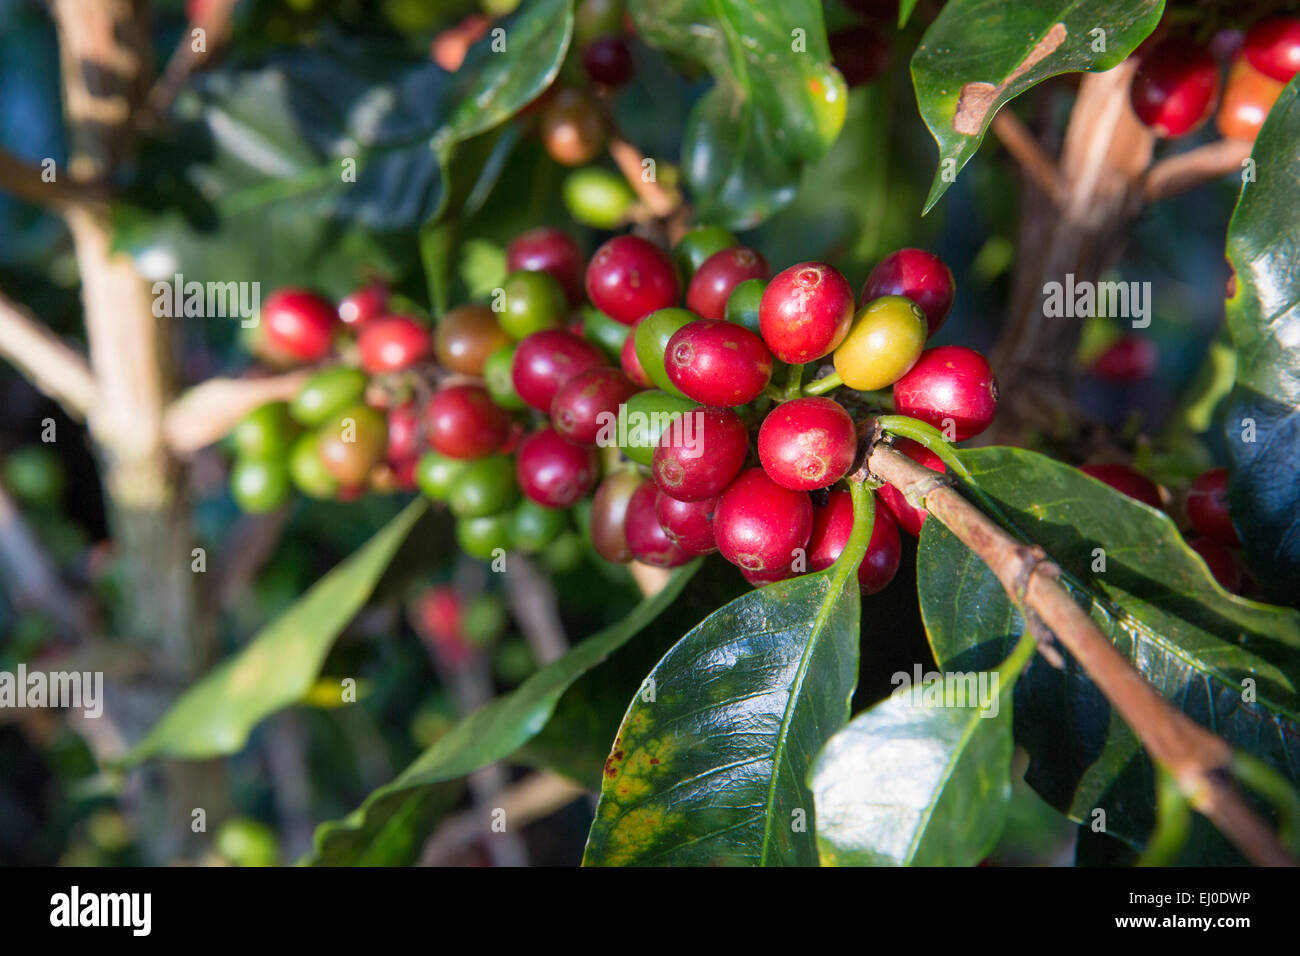 South America, Latin America, Colombia, coffee production, coffee, agriculture, Kaffebohnen, Pereira Stock Photo